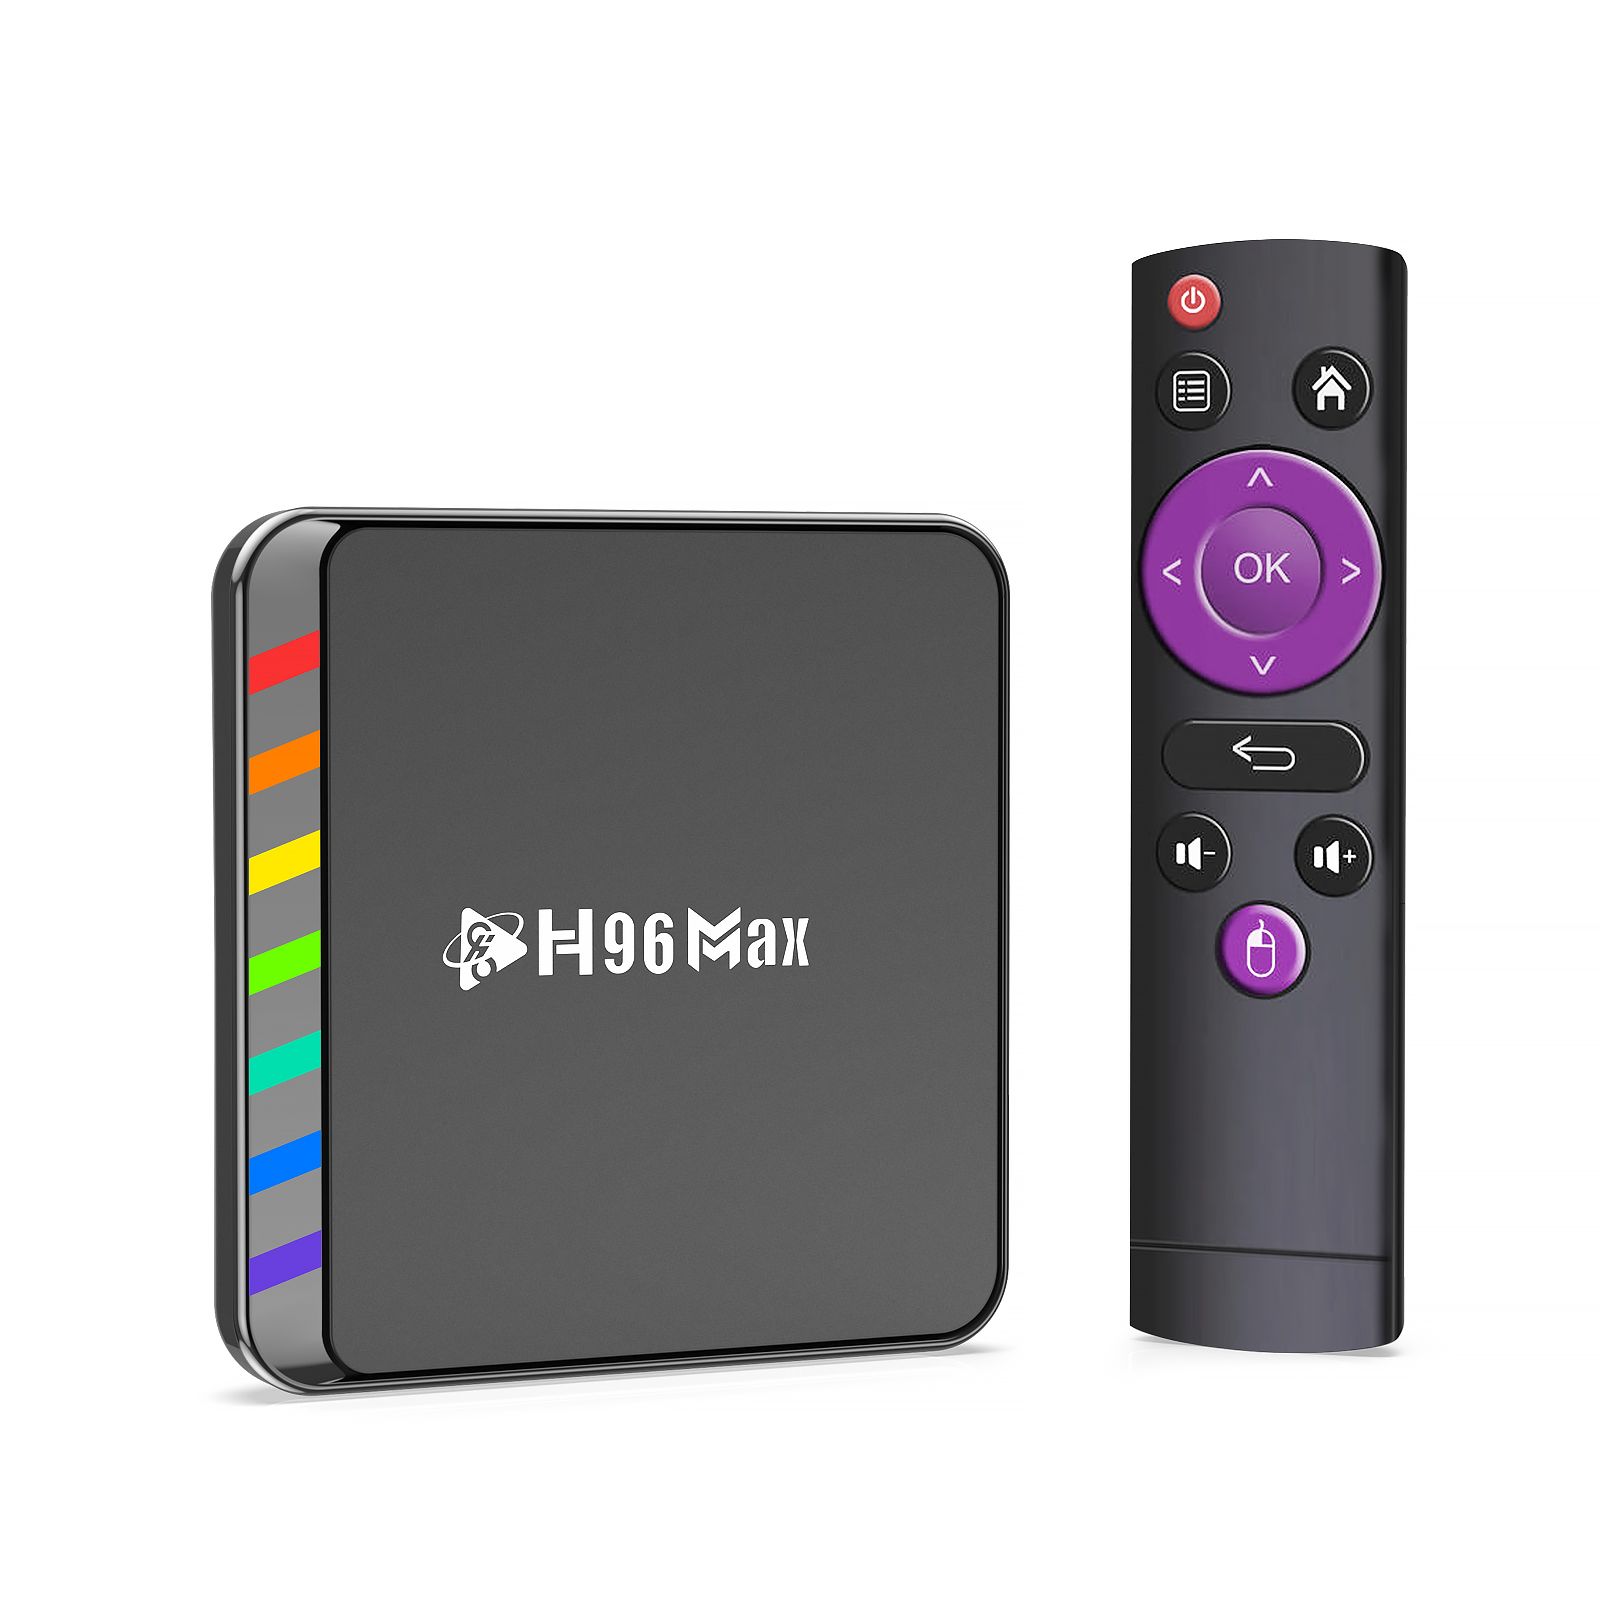 H96 Max W2 Android 11 TV Box Amlogic S905W2 Dual WiFi BT 2GB 16GB AV1 4K  60fps Video Decoder Android TV Box From Xinyin10, $22.26